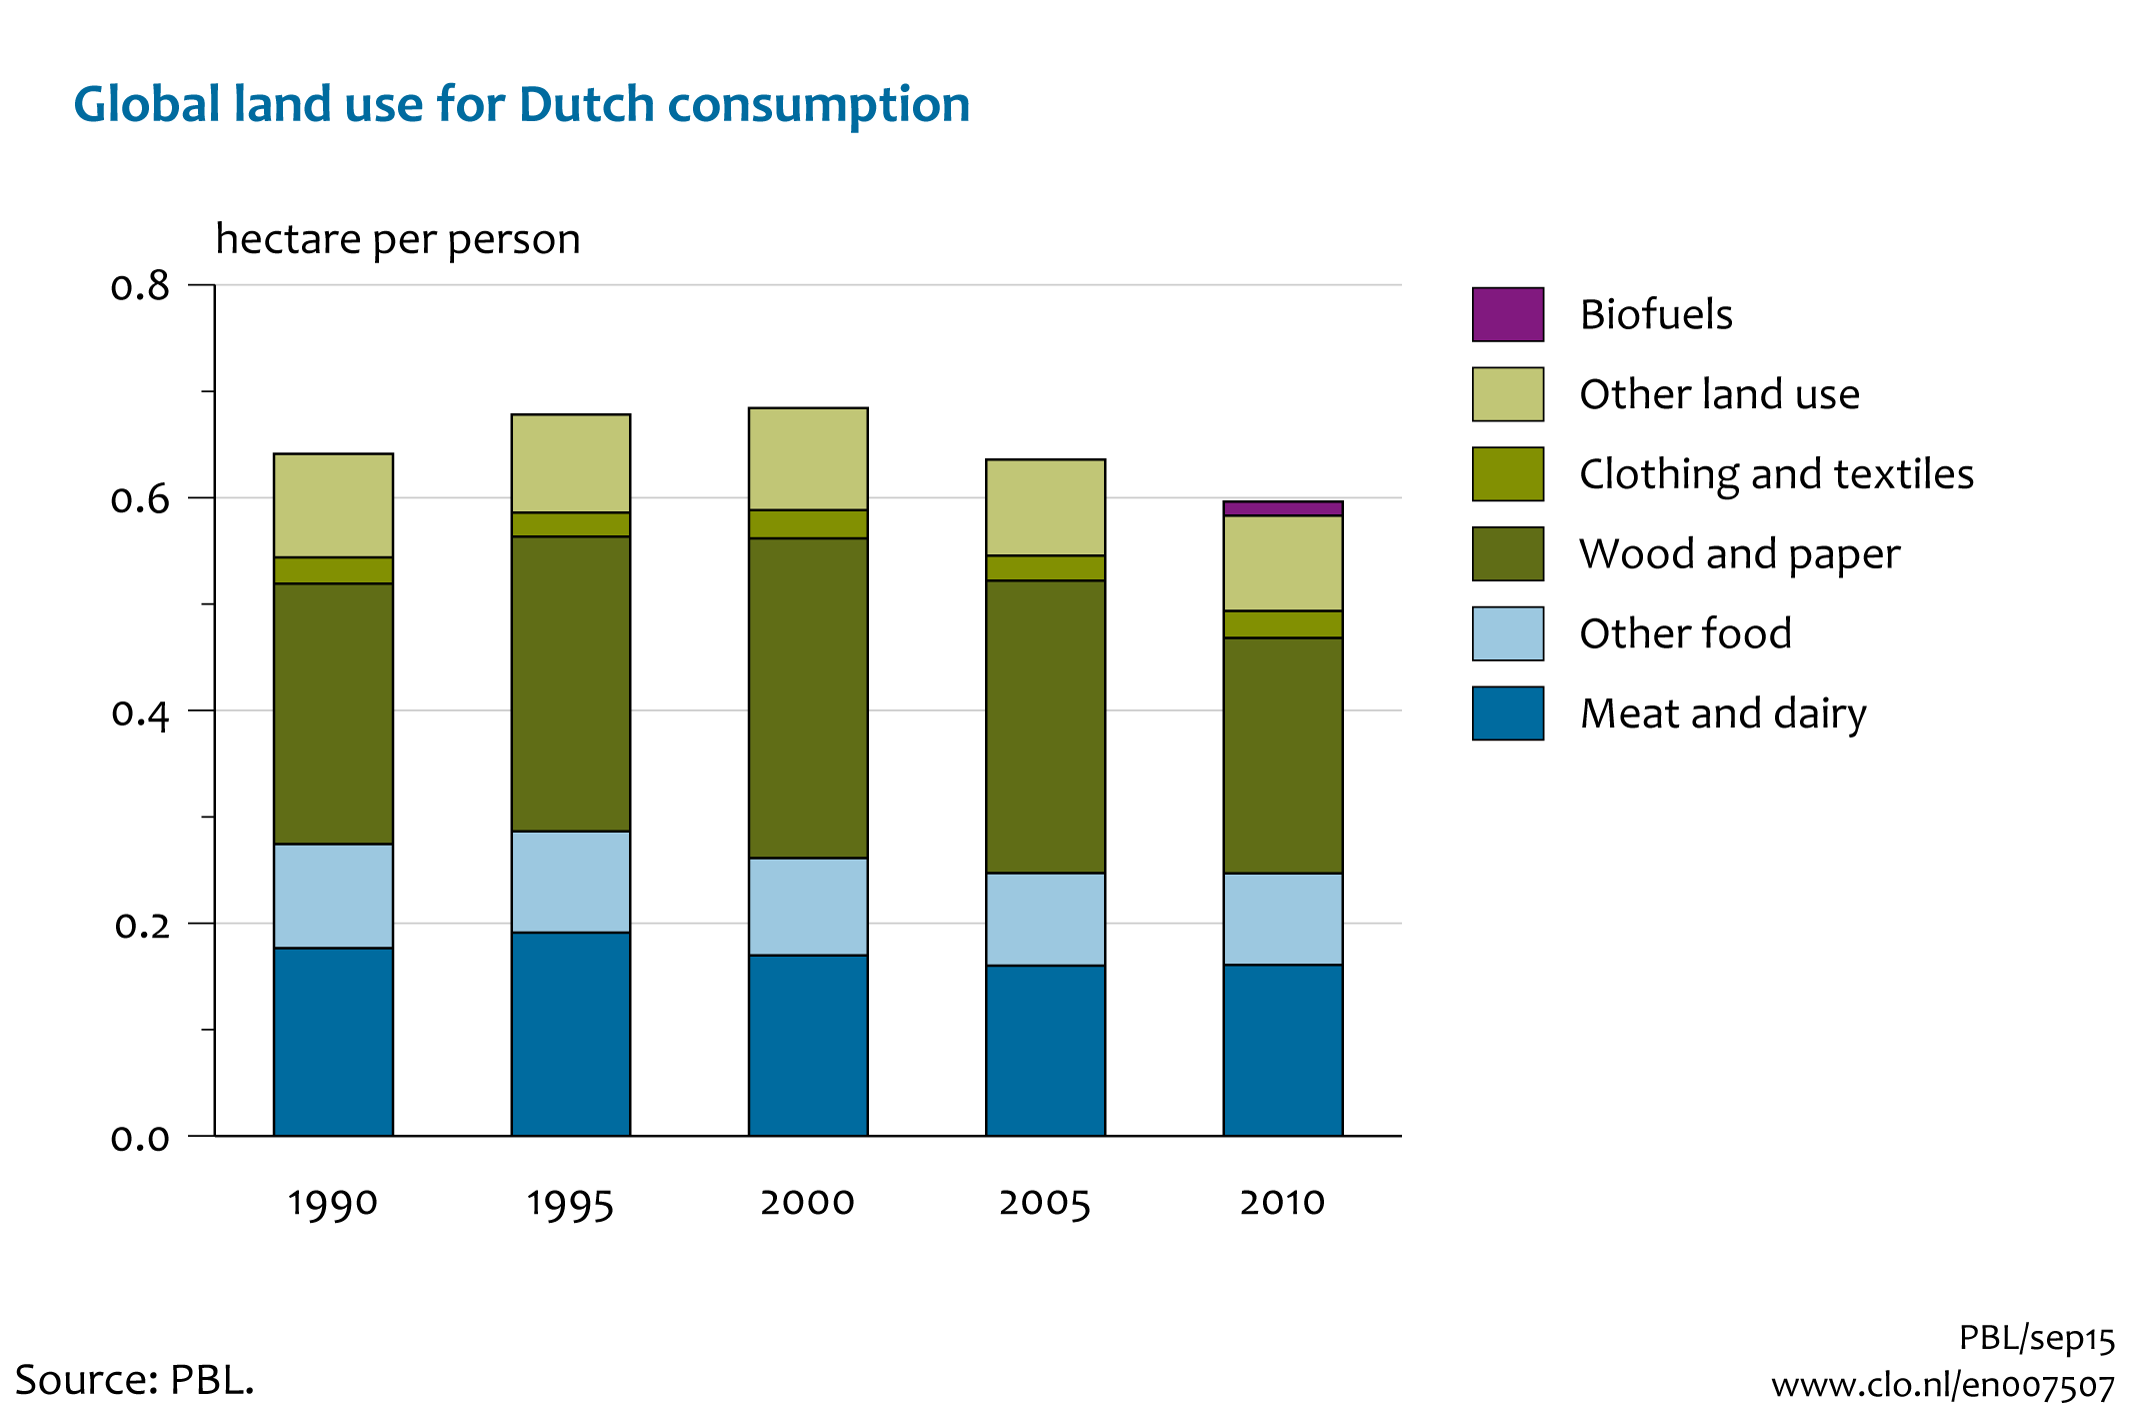 Image  Global land use for Dutch consumption per person. The image is further explained in the text.